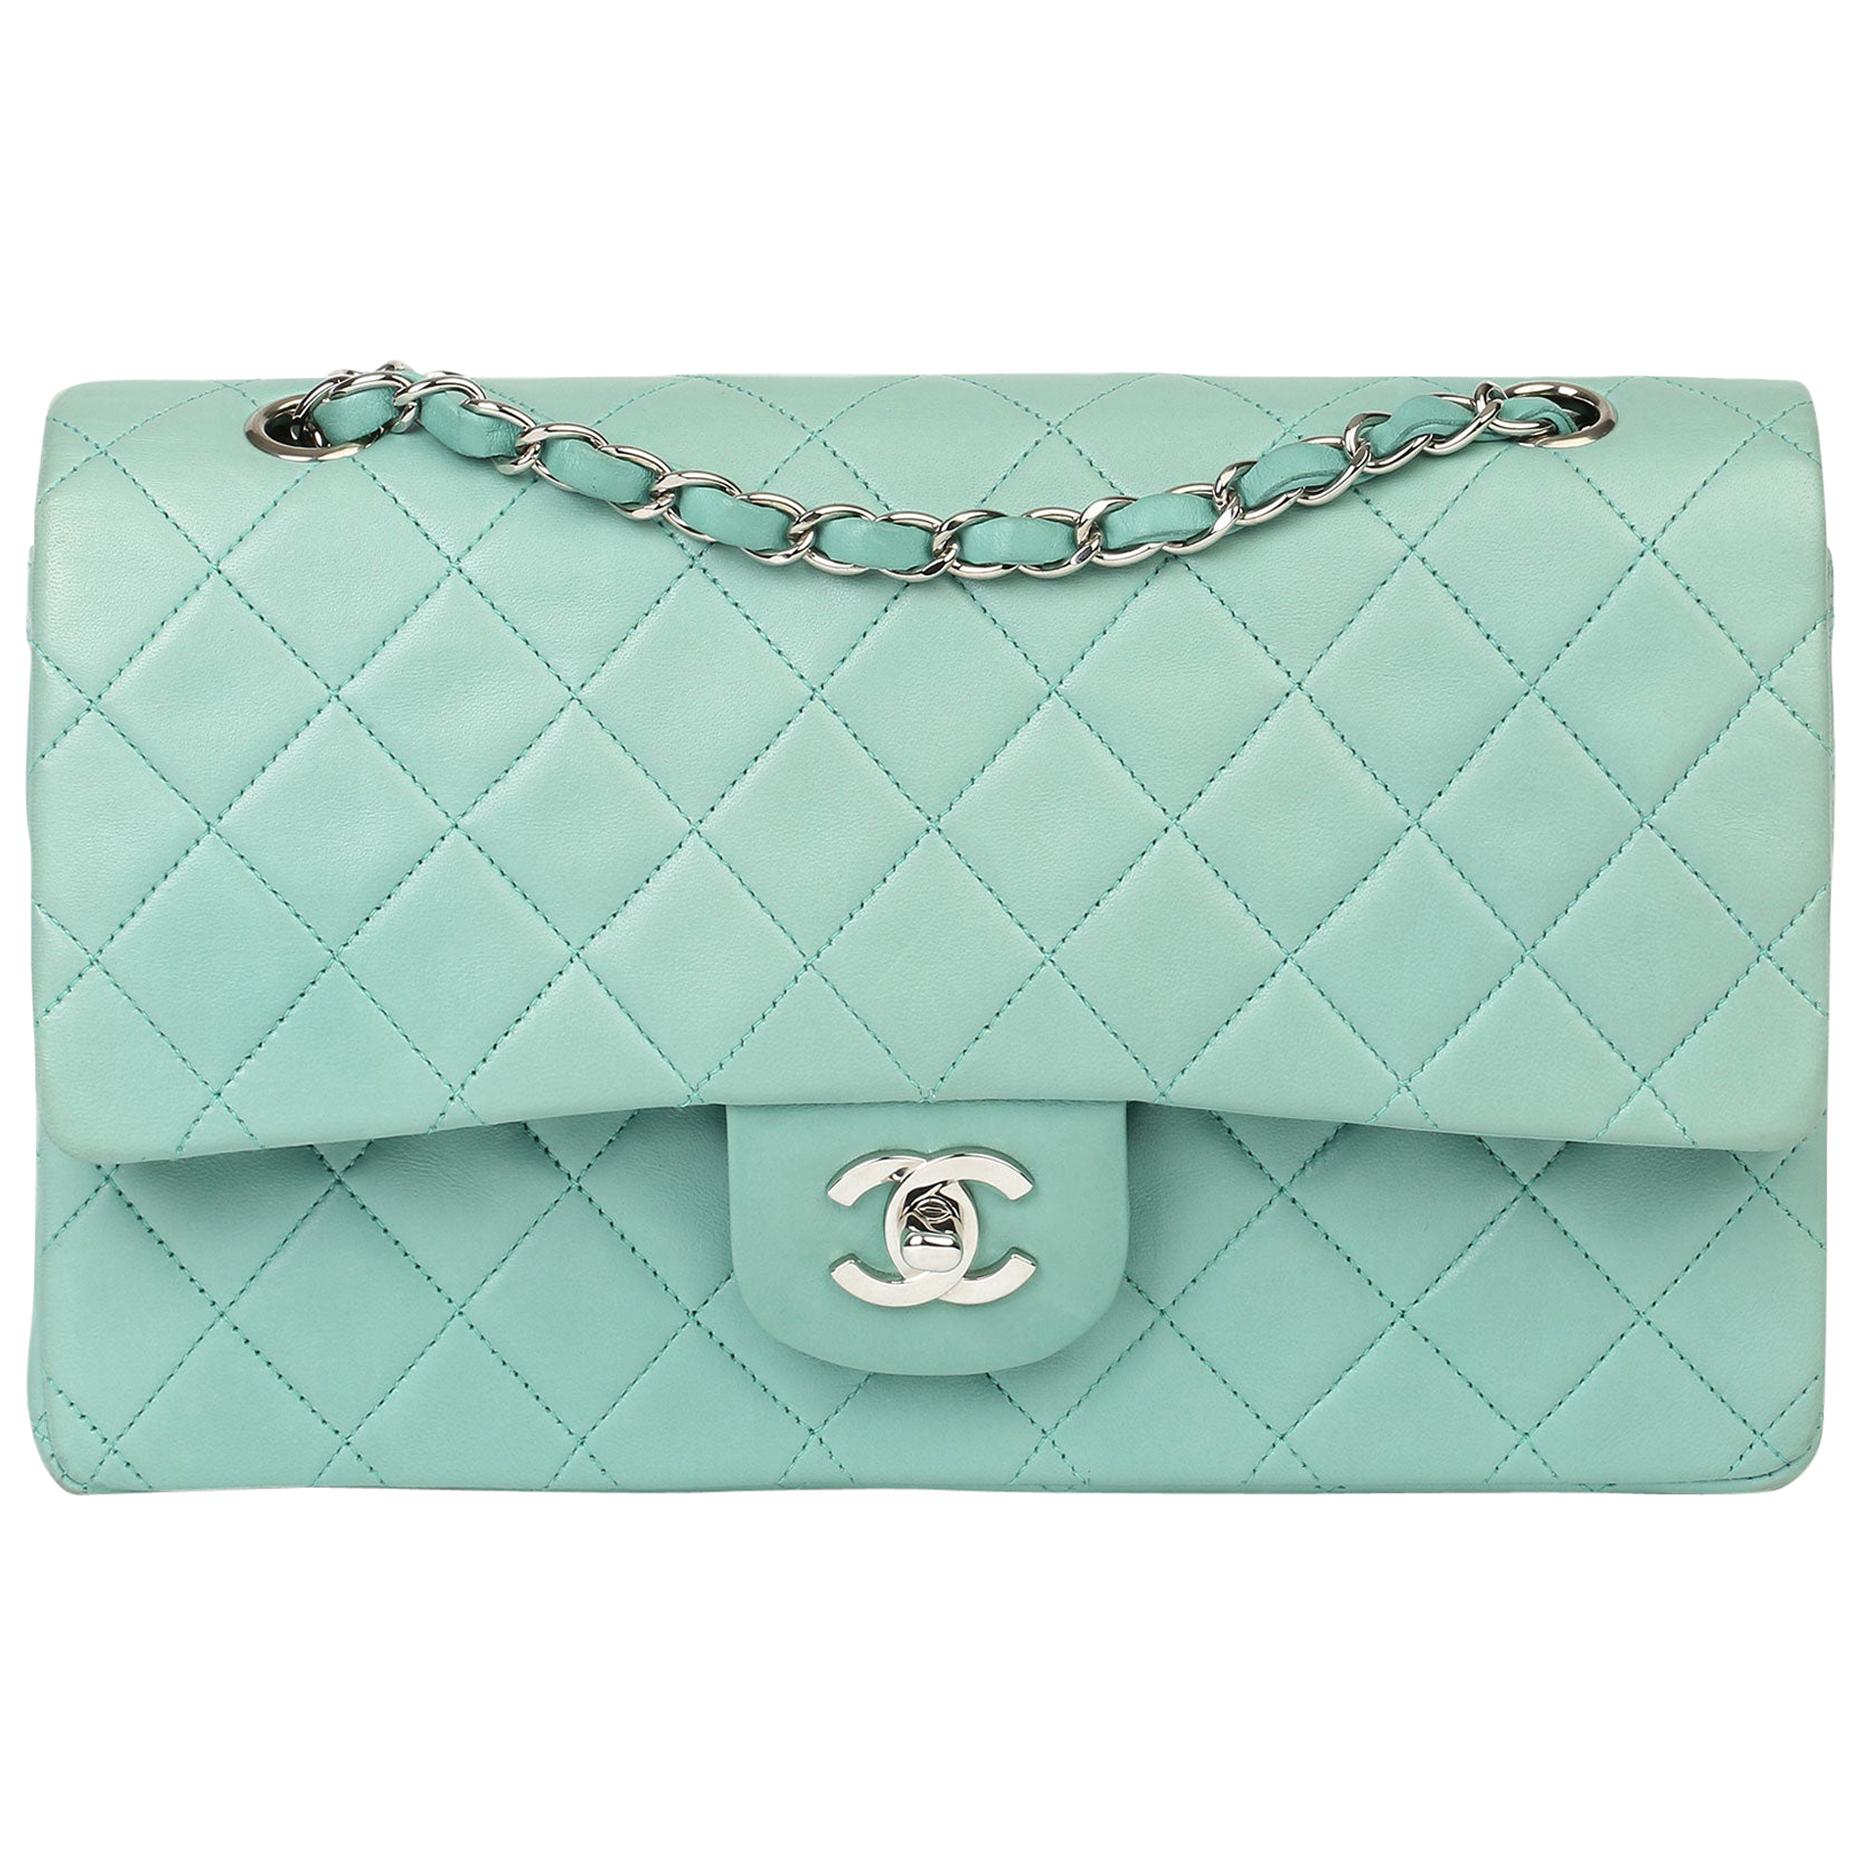 1998 Chanel Light Blue Quilted Lambskin Medium Classic Double